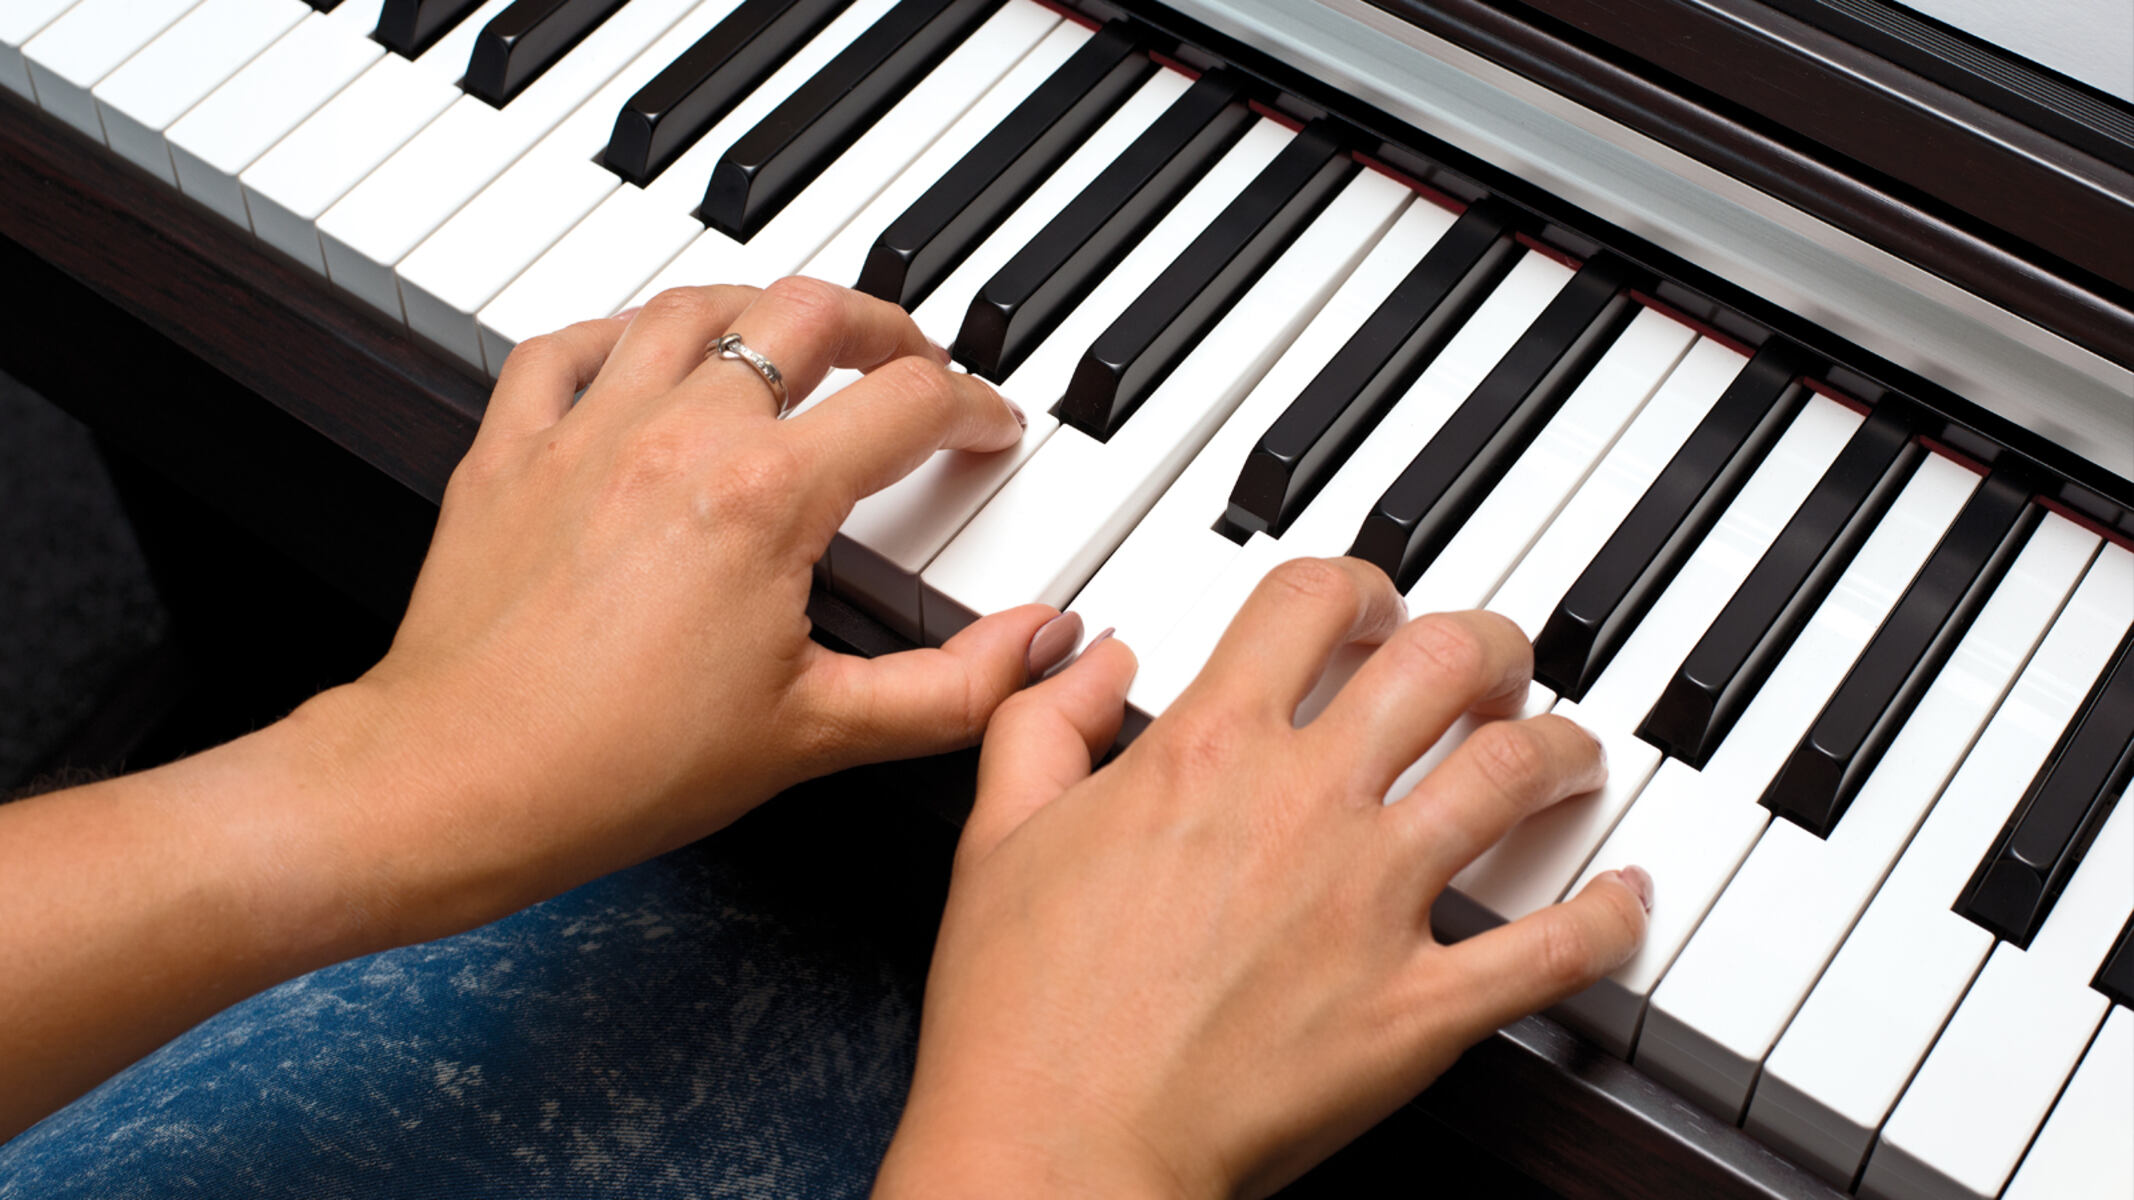 8-best-budget-digital-piano-for-beginners